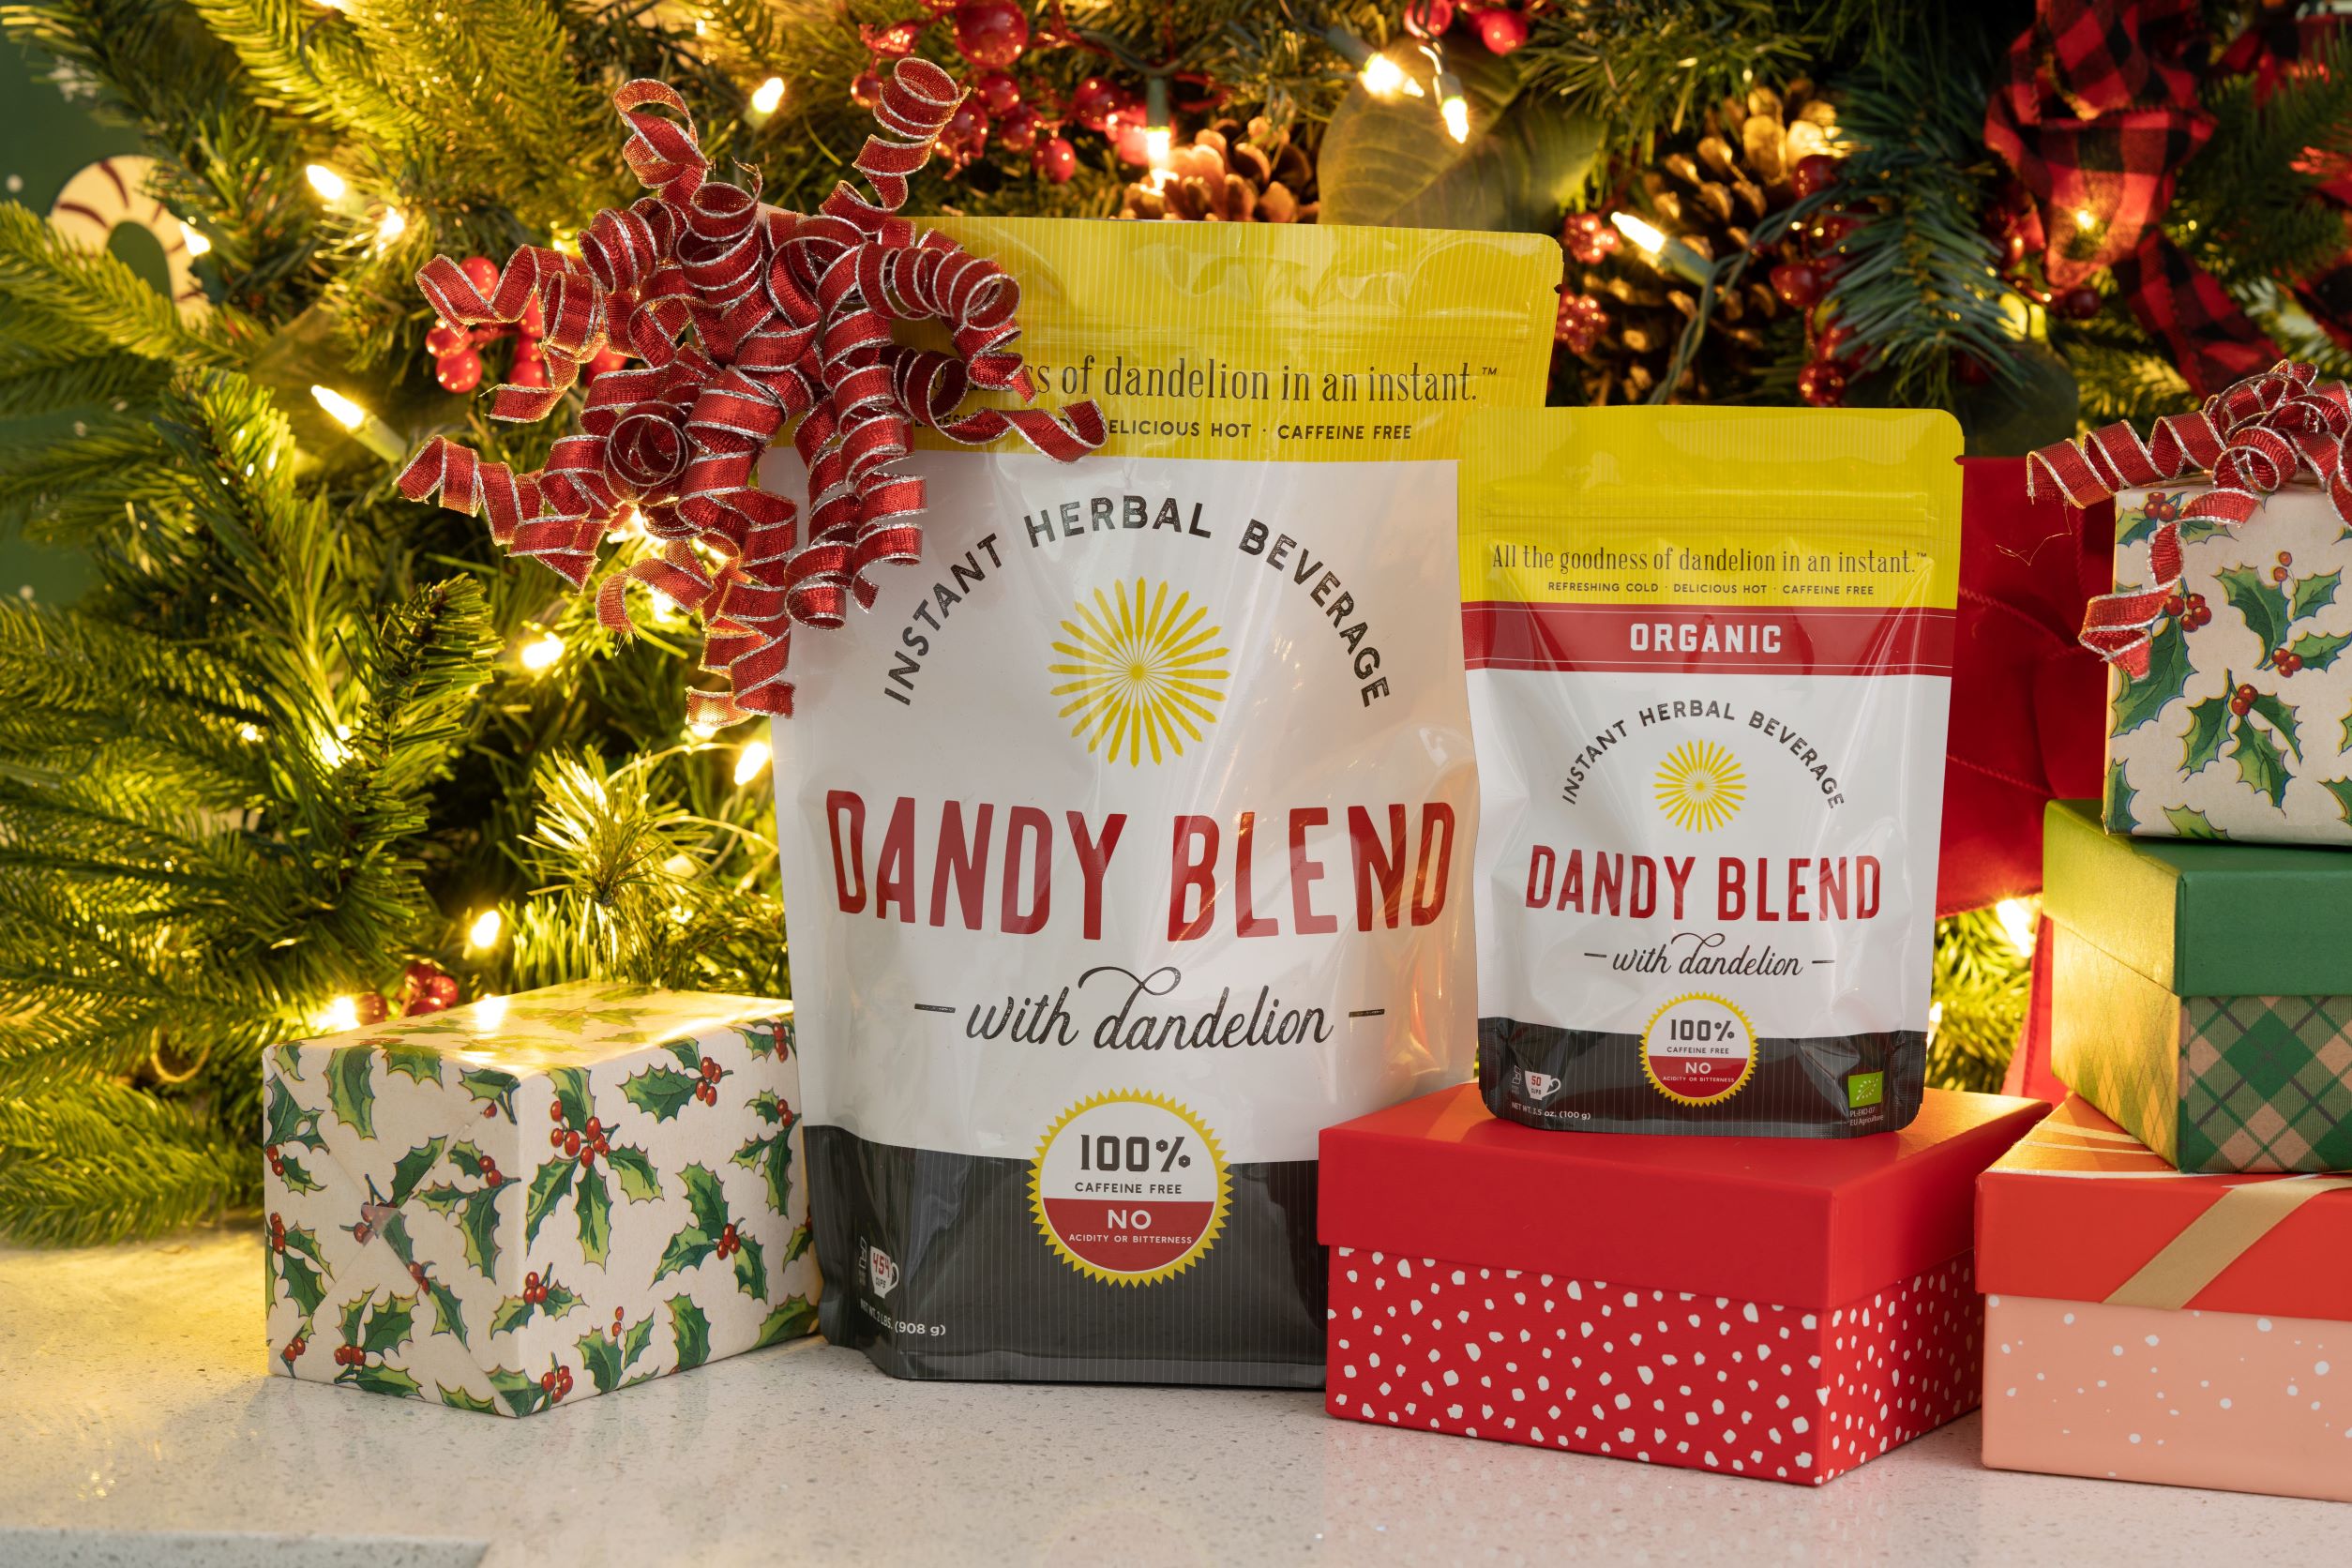 A Roundup of Our Favorite Dandy Blend Gifts